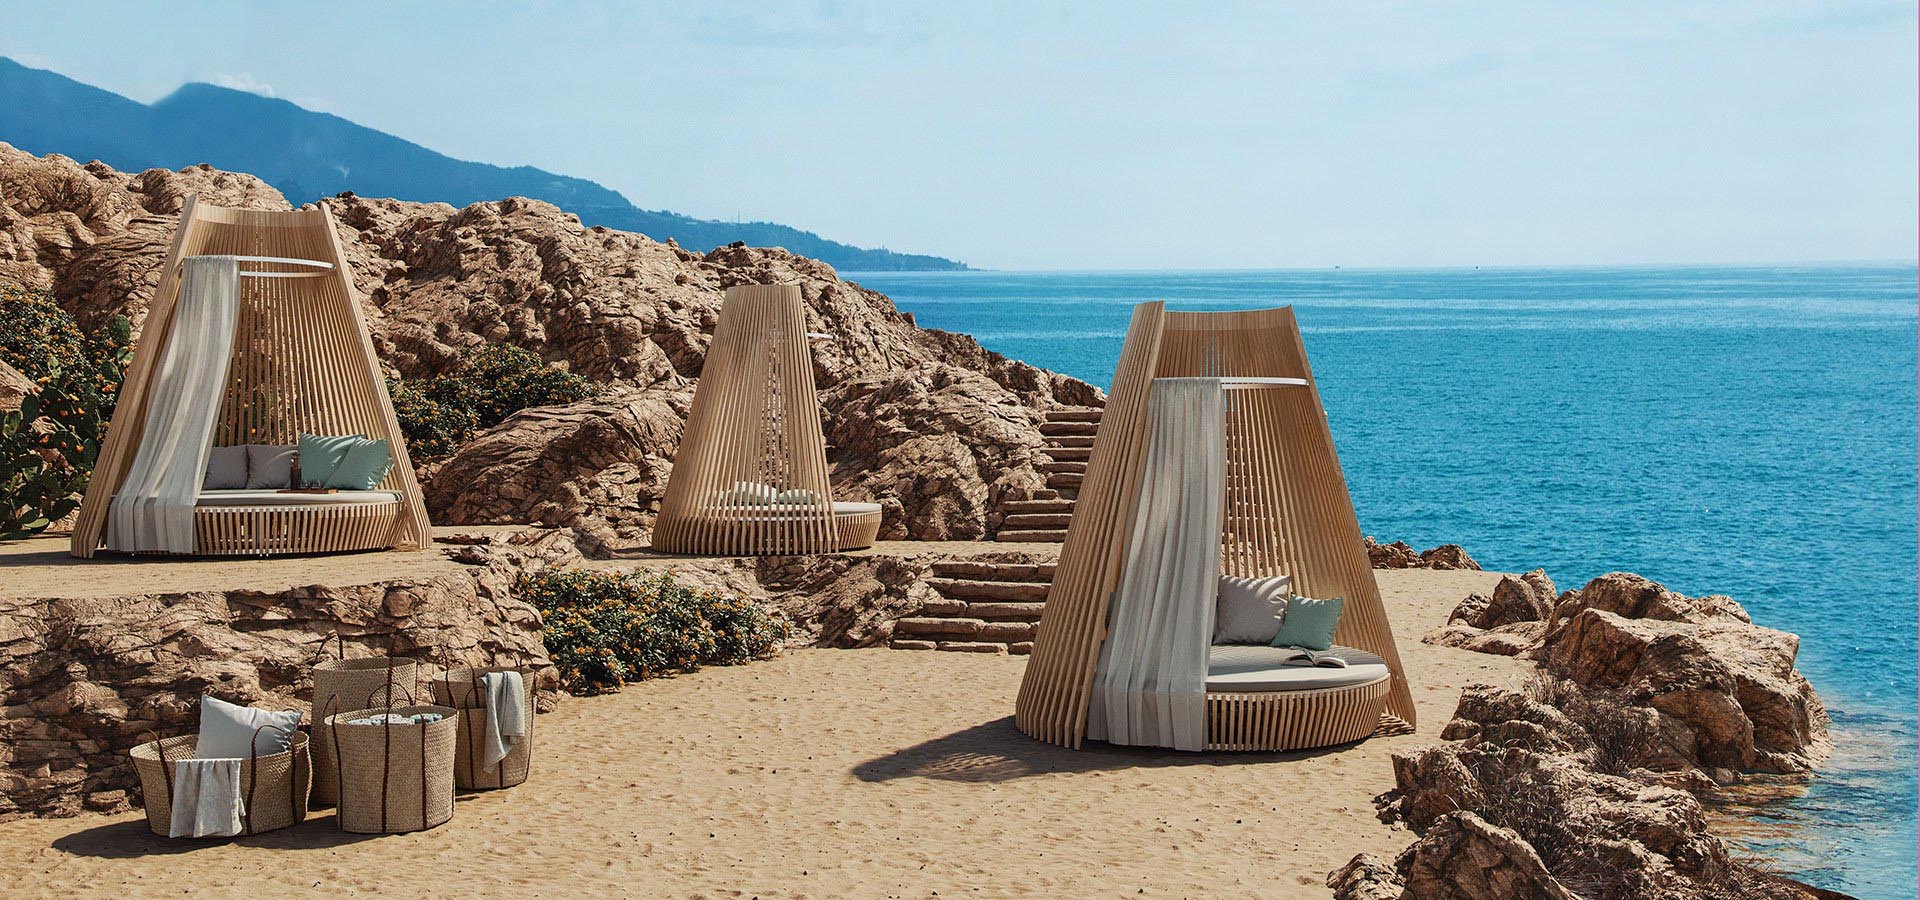 'Hut', a new outdoor furniture design that's made to feel like a welcoming and comfortable nest.